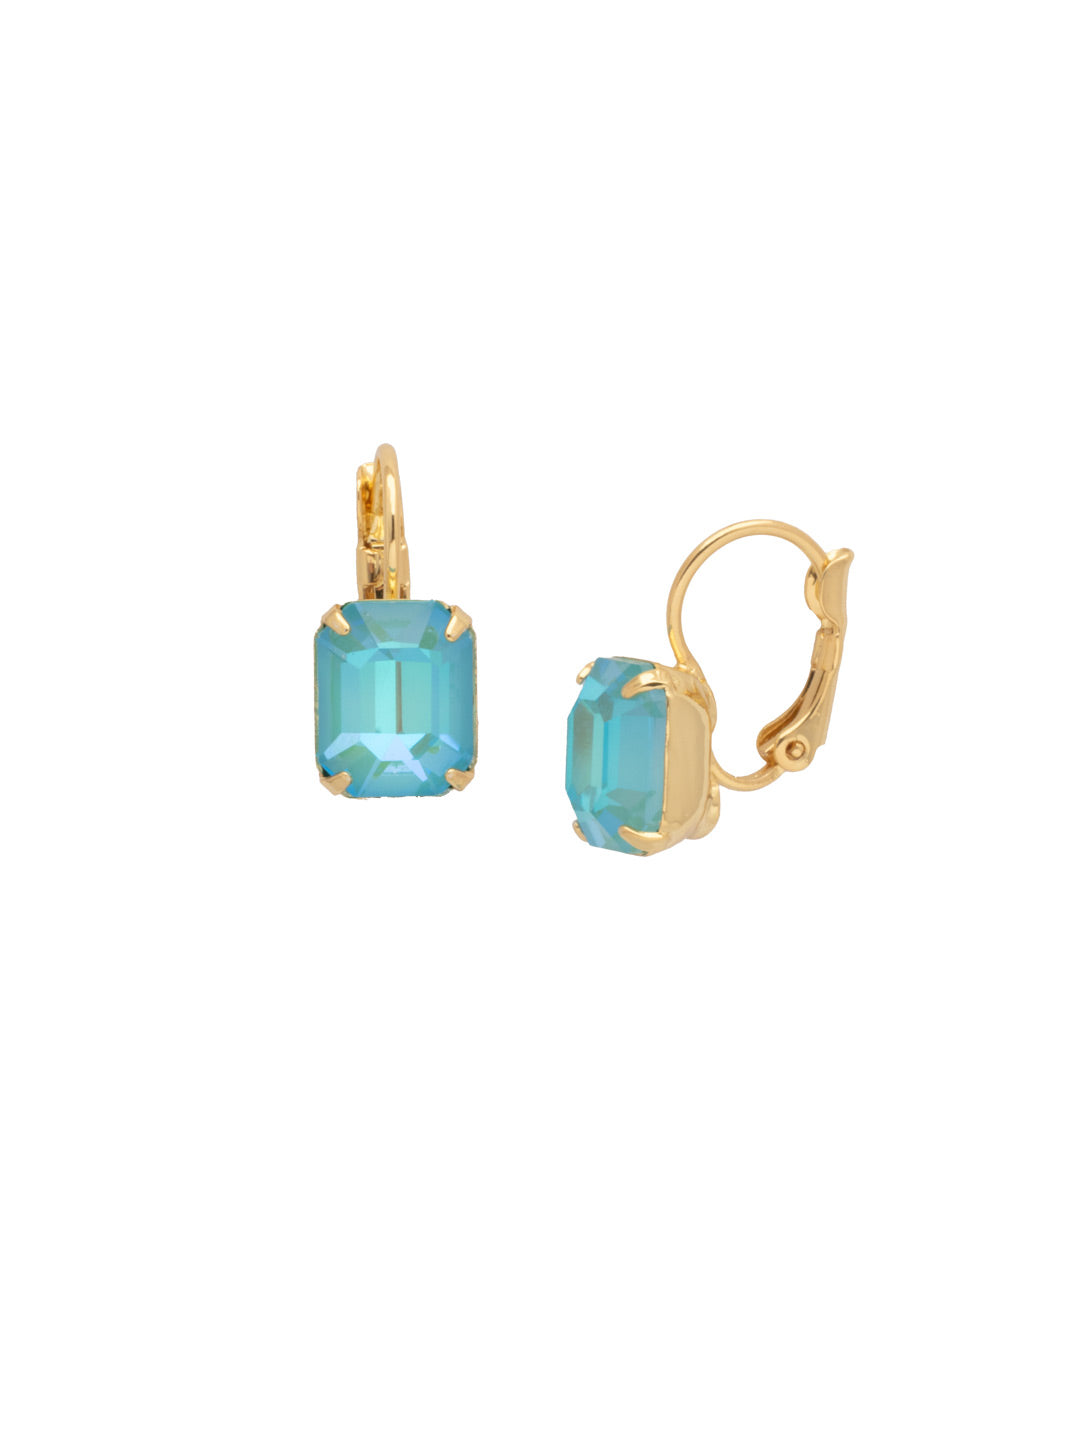 Octavia Dangle Earrings - EFK6BGPRT - <p>The Octavia Dangle Earrings feature a small emerald cut crystal dangling from a lever-back French wire. From Sorrelli's Portofino collection in our Bright Gold-tone finish.</p>